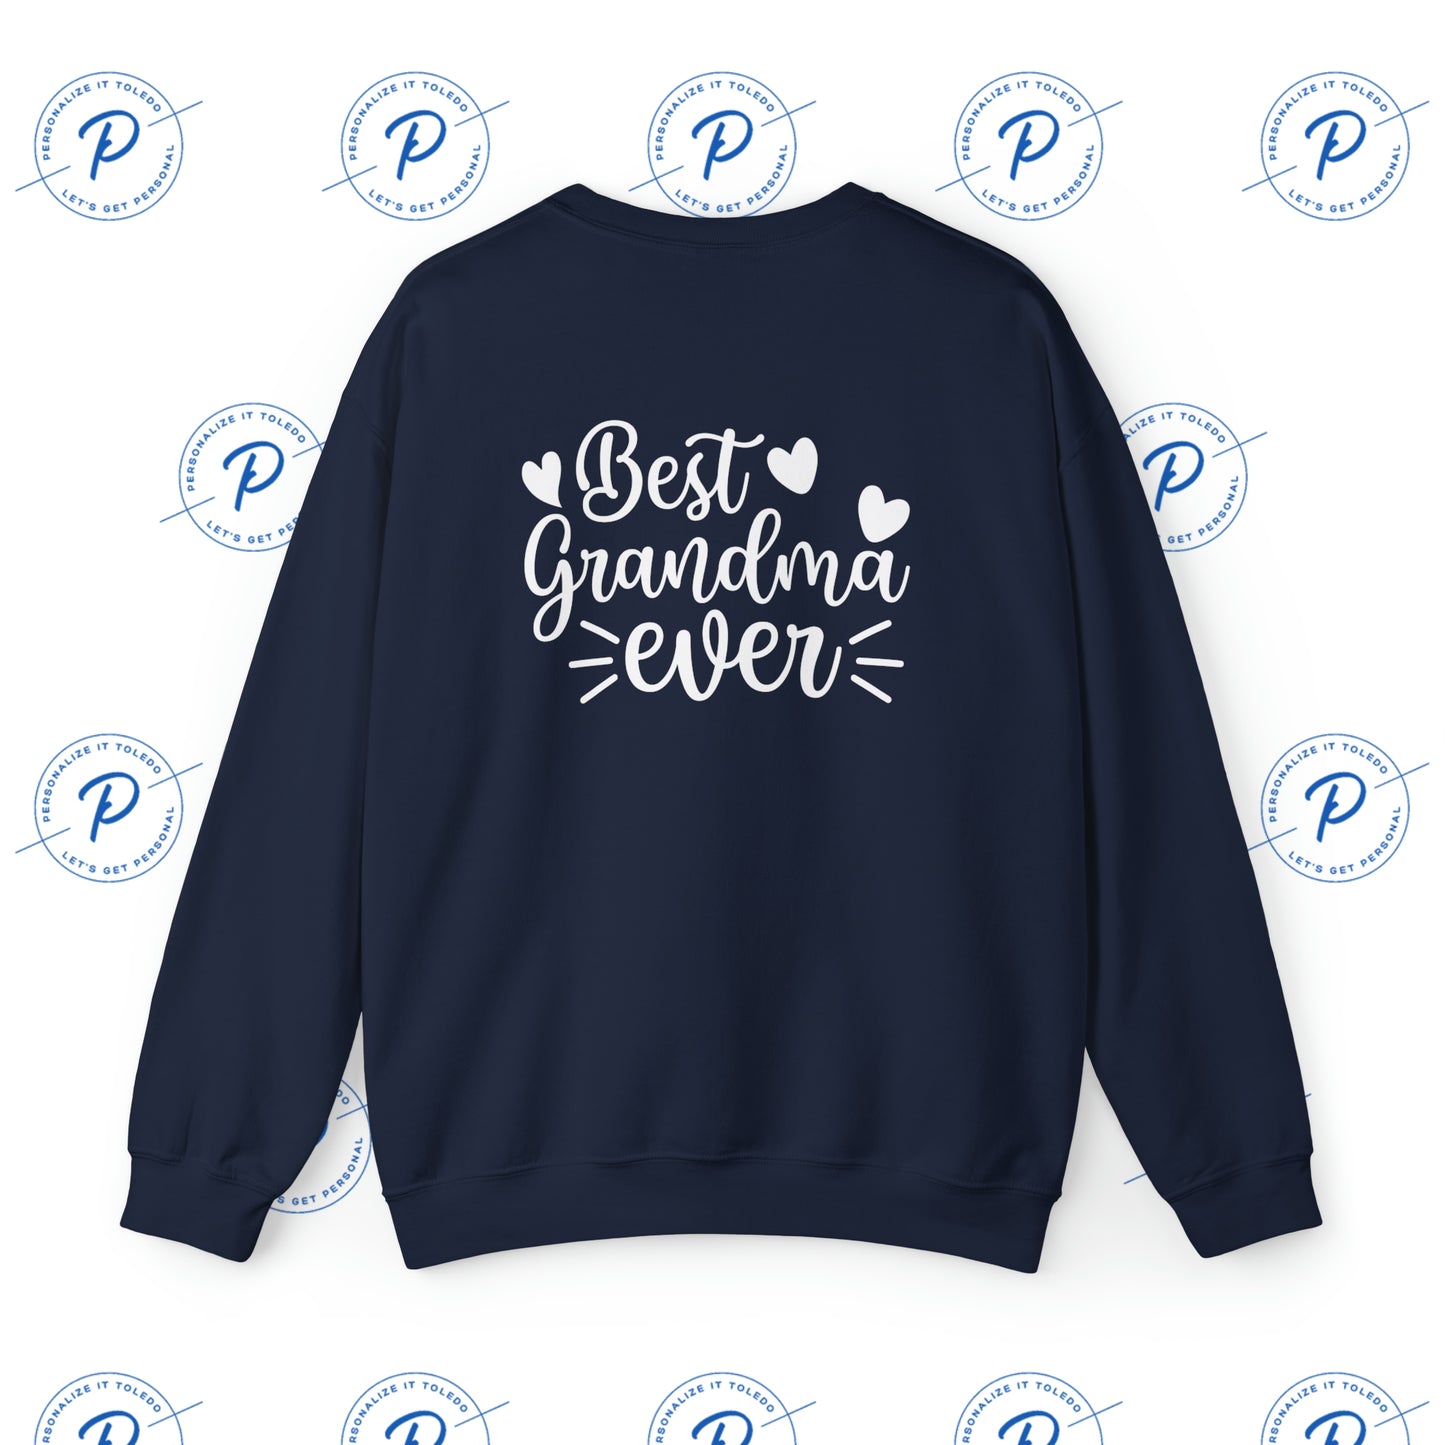 Cherish Grandma with a Personalized Touch – 'Best Grandma Ever' Sweatshirt, Perfect for Grandma Gifts!